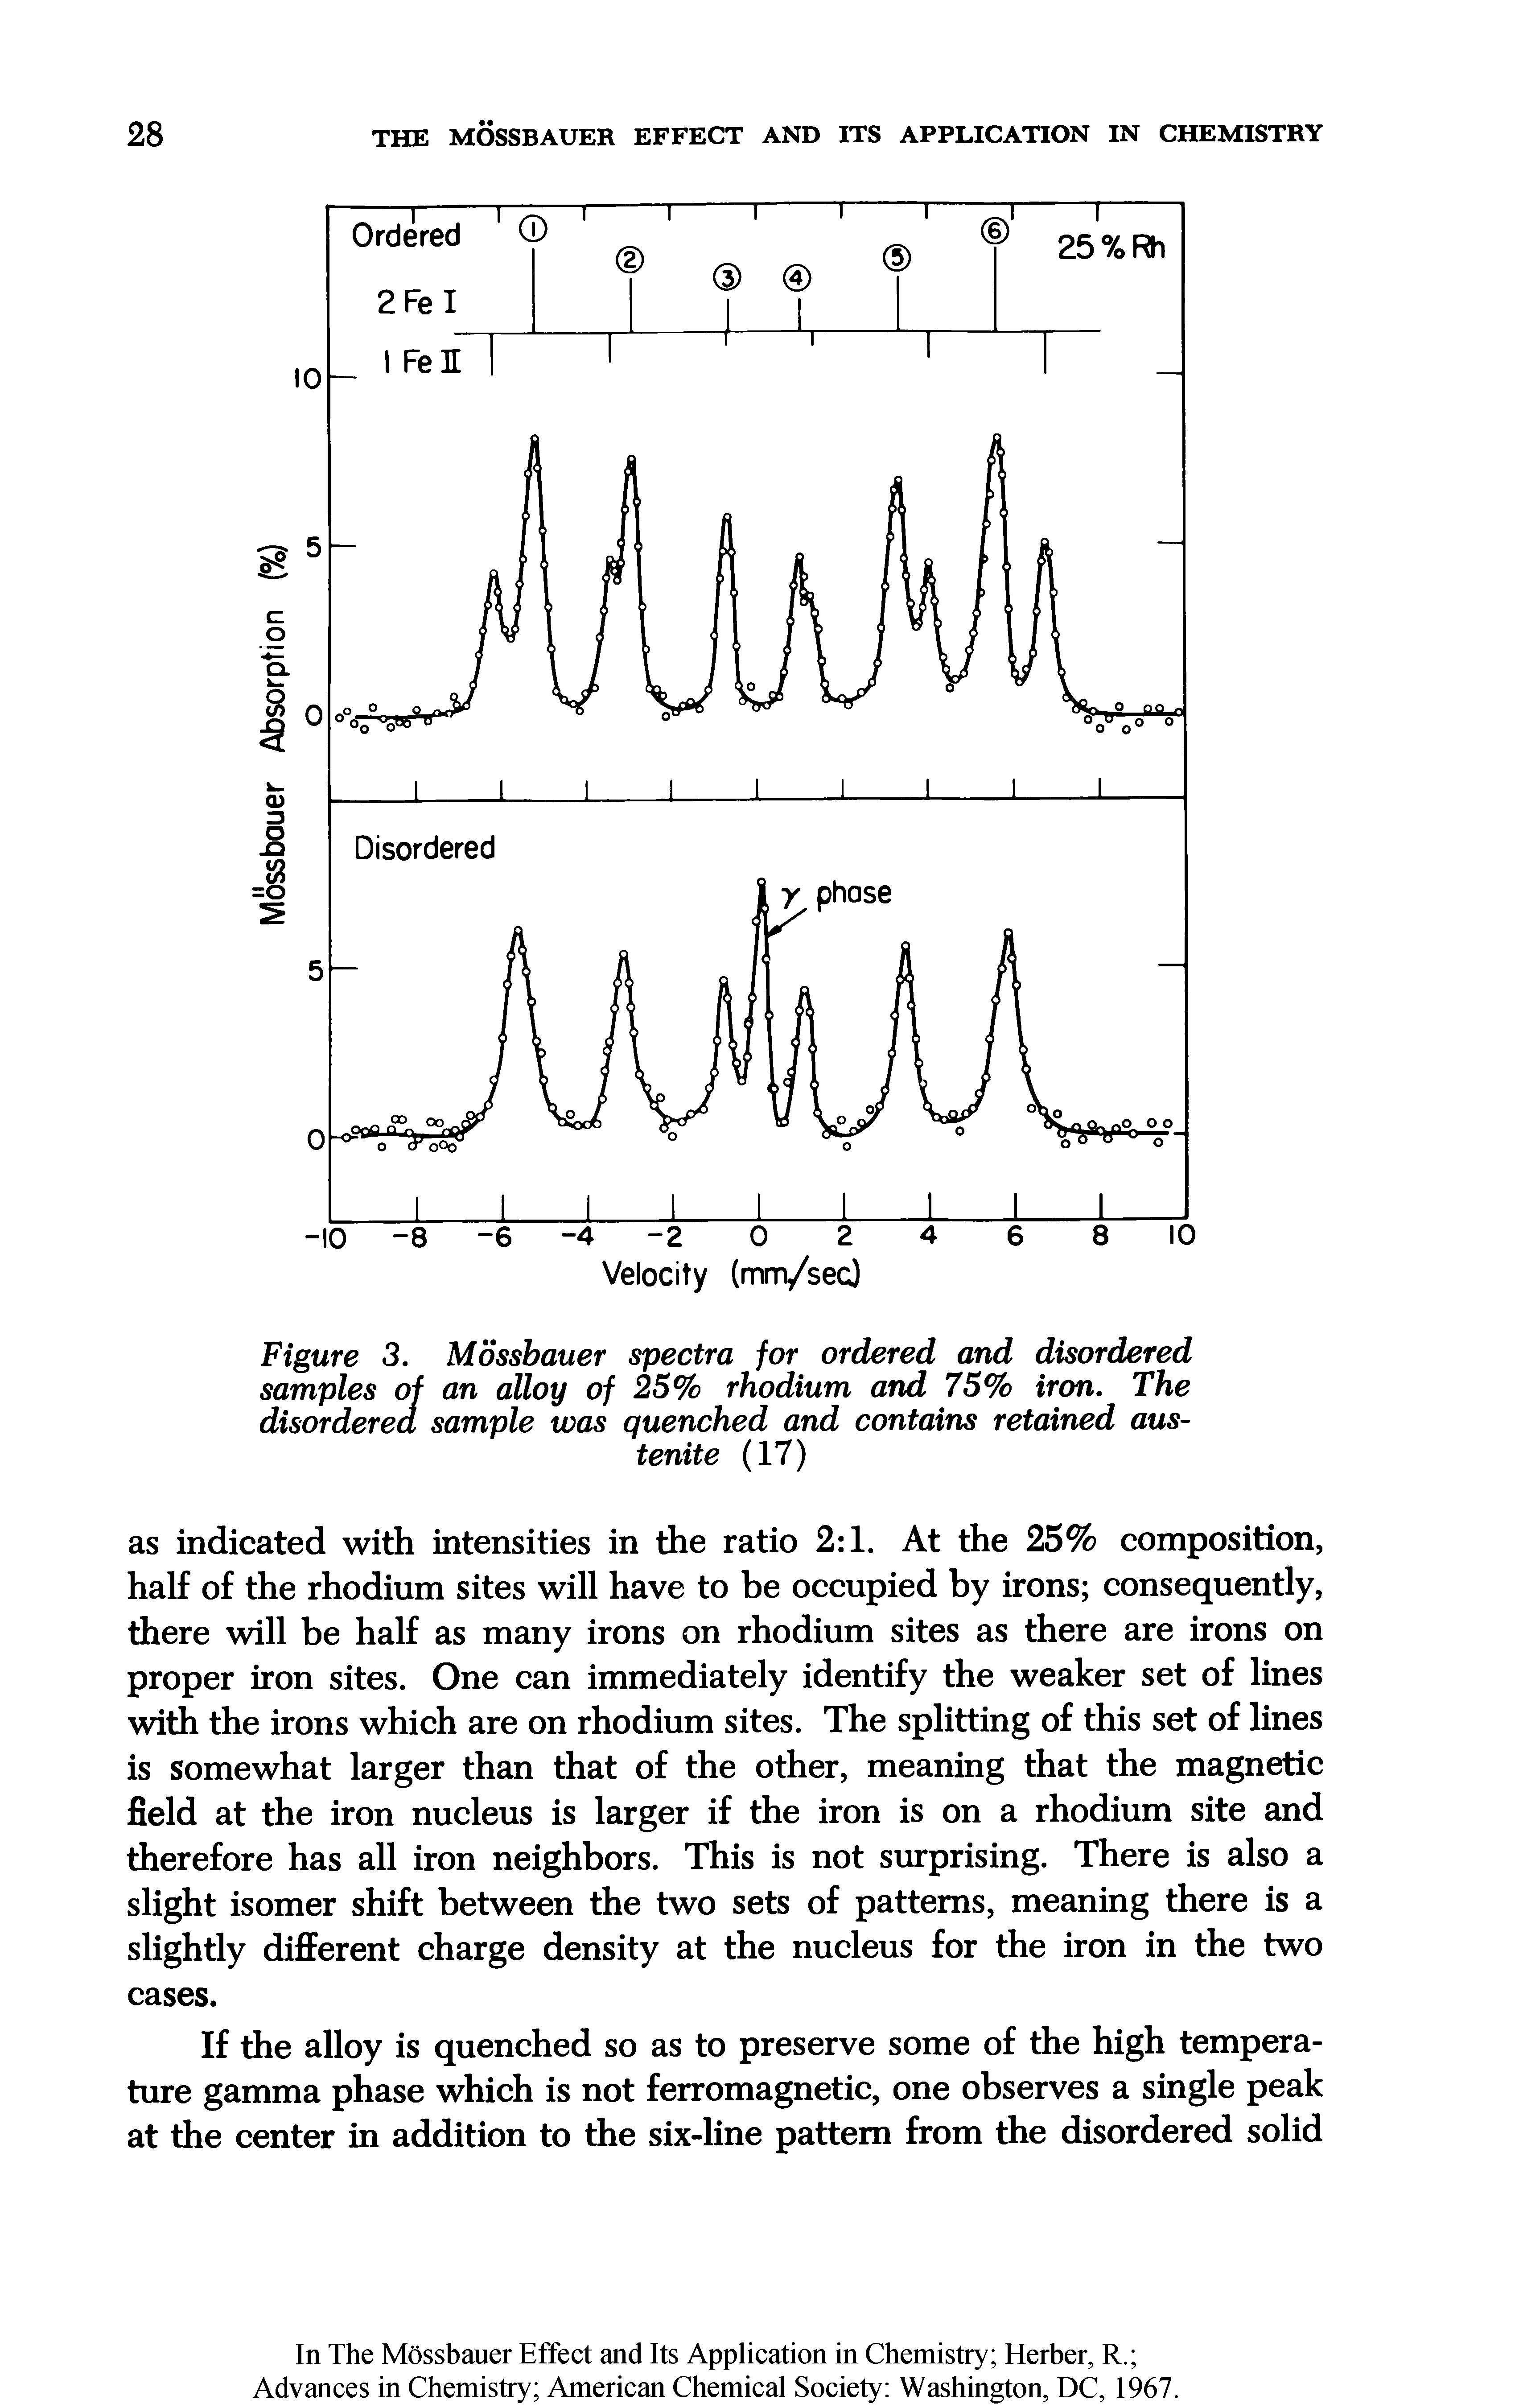 Figure 3. Mossbauer spectra for ordered and disordered samples of an alloy of 25% rhodium and 75% iron. The disordered sample was quenched and contains retained austenite (17)...